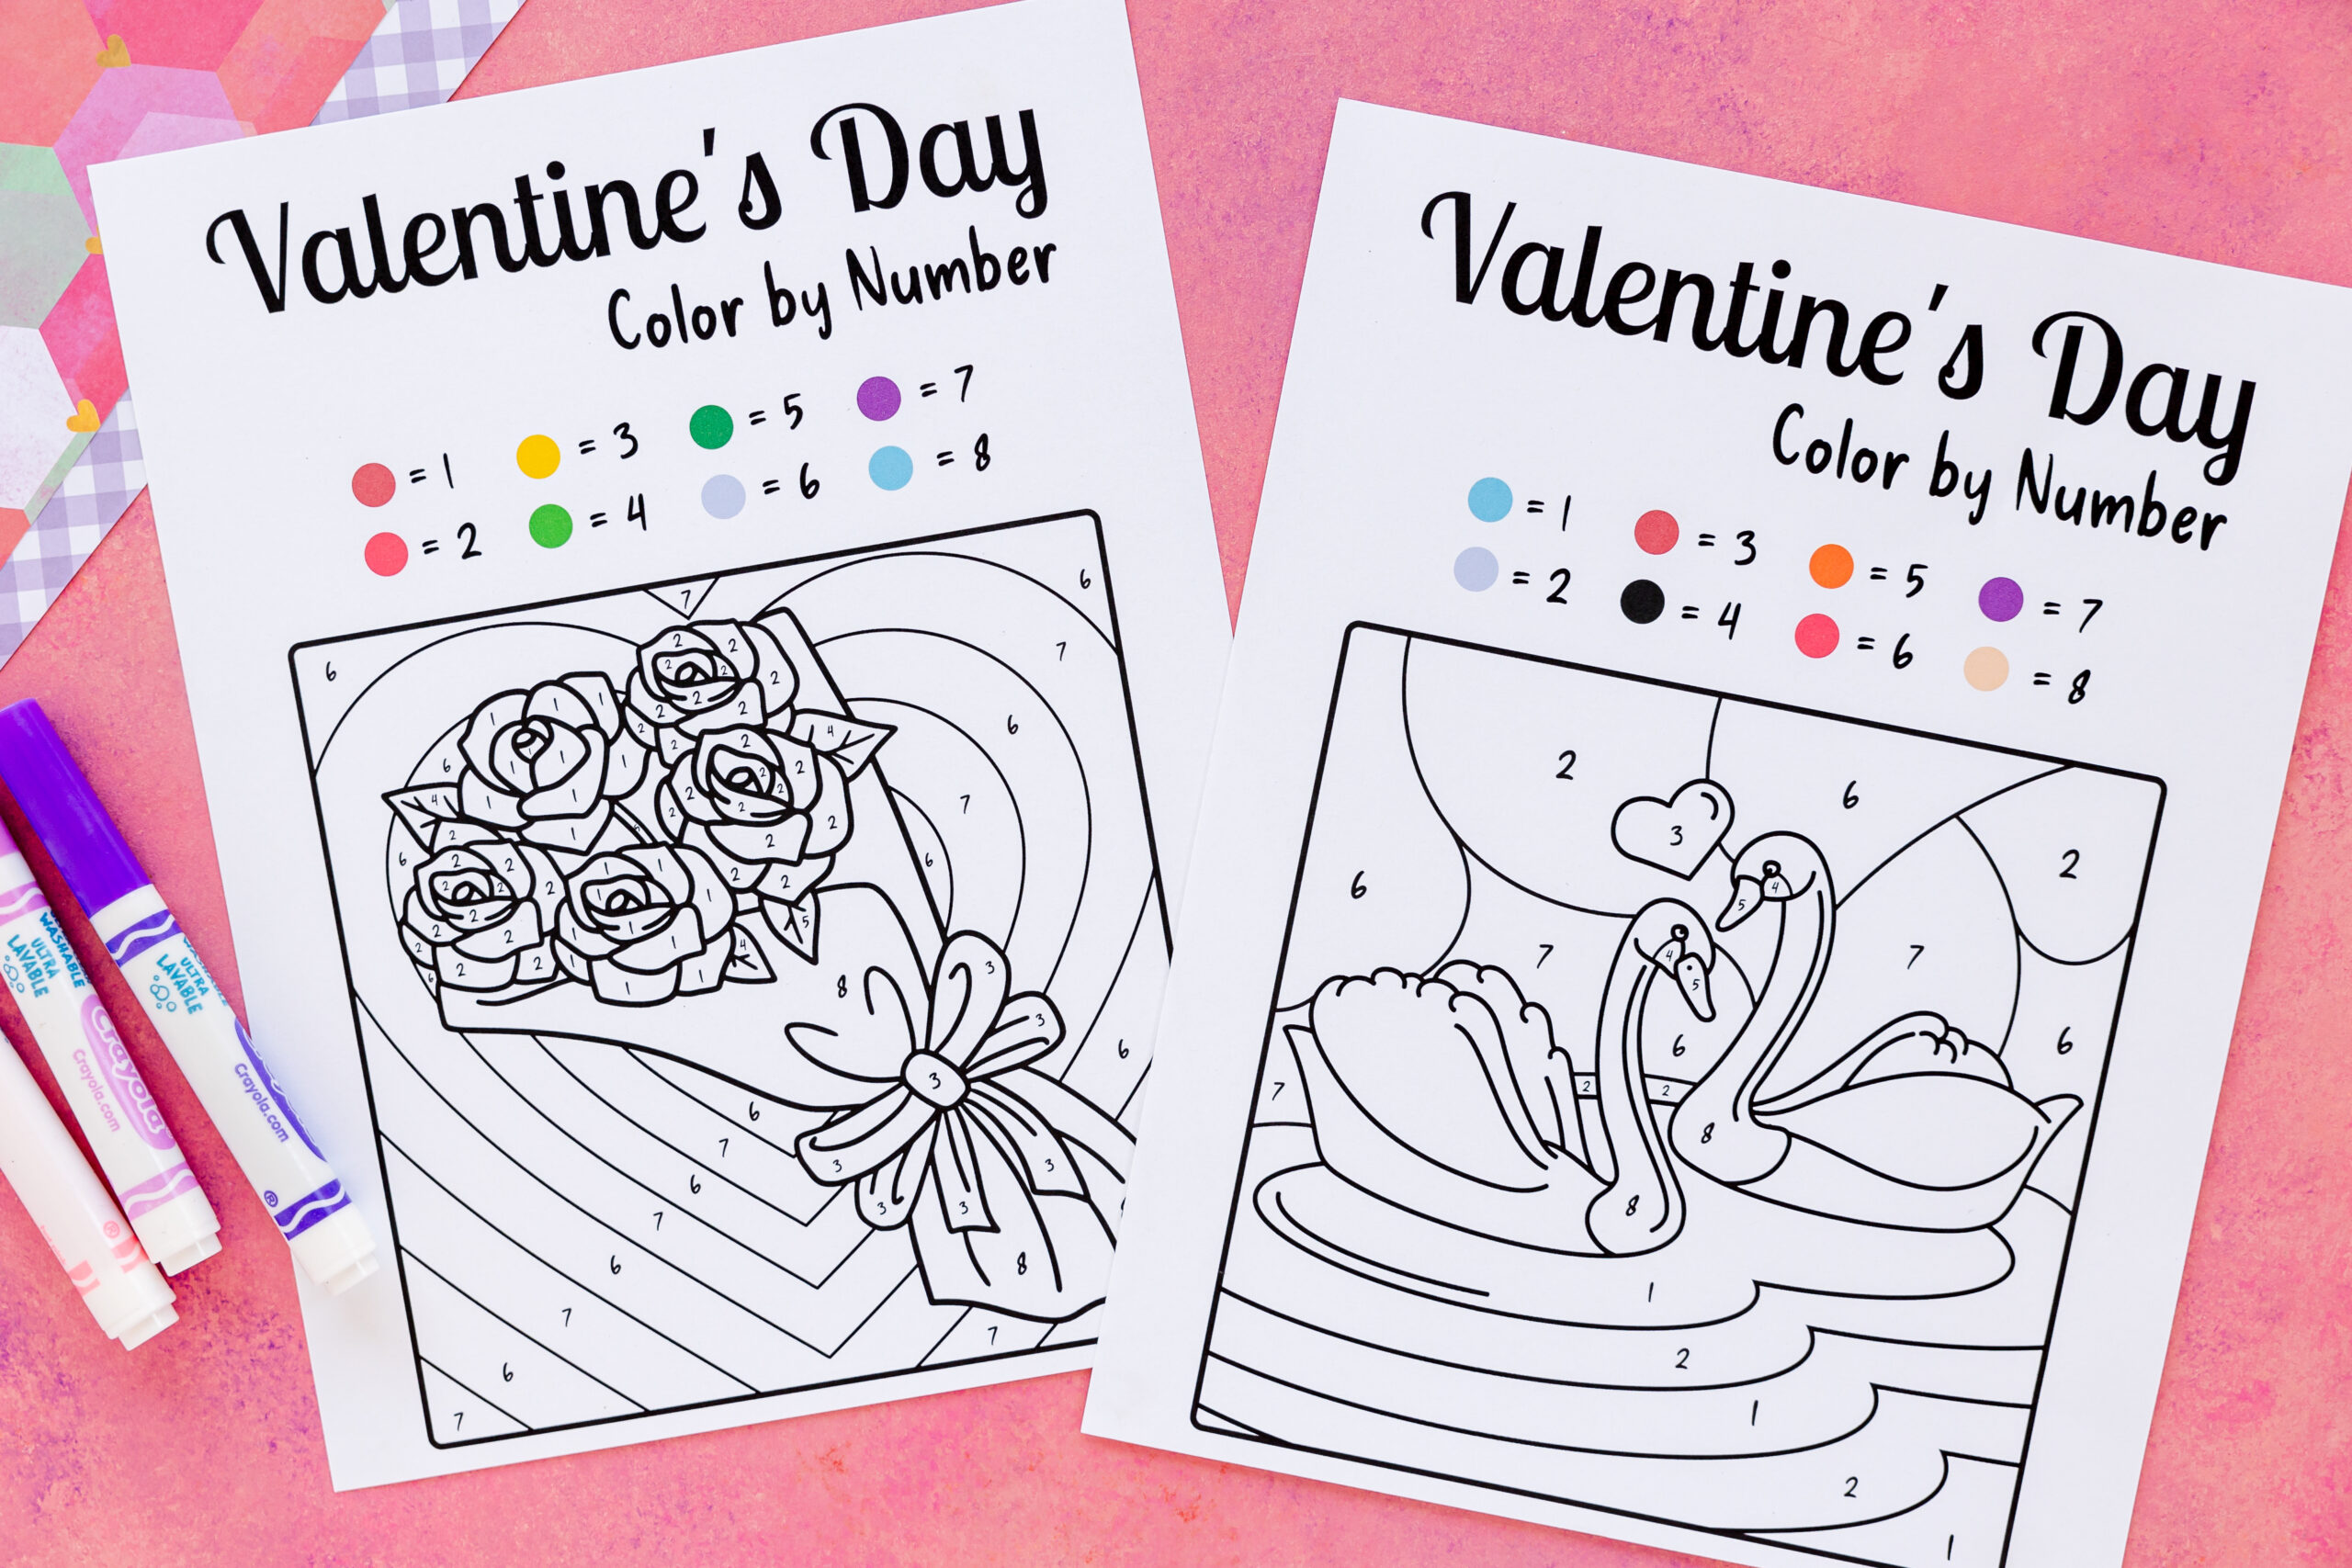 blank color by number printables with rose and swan designs